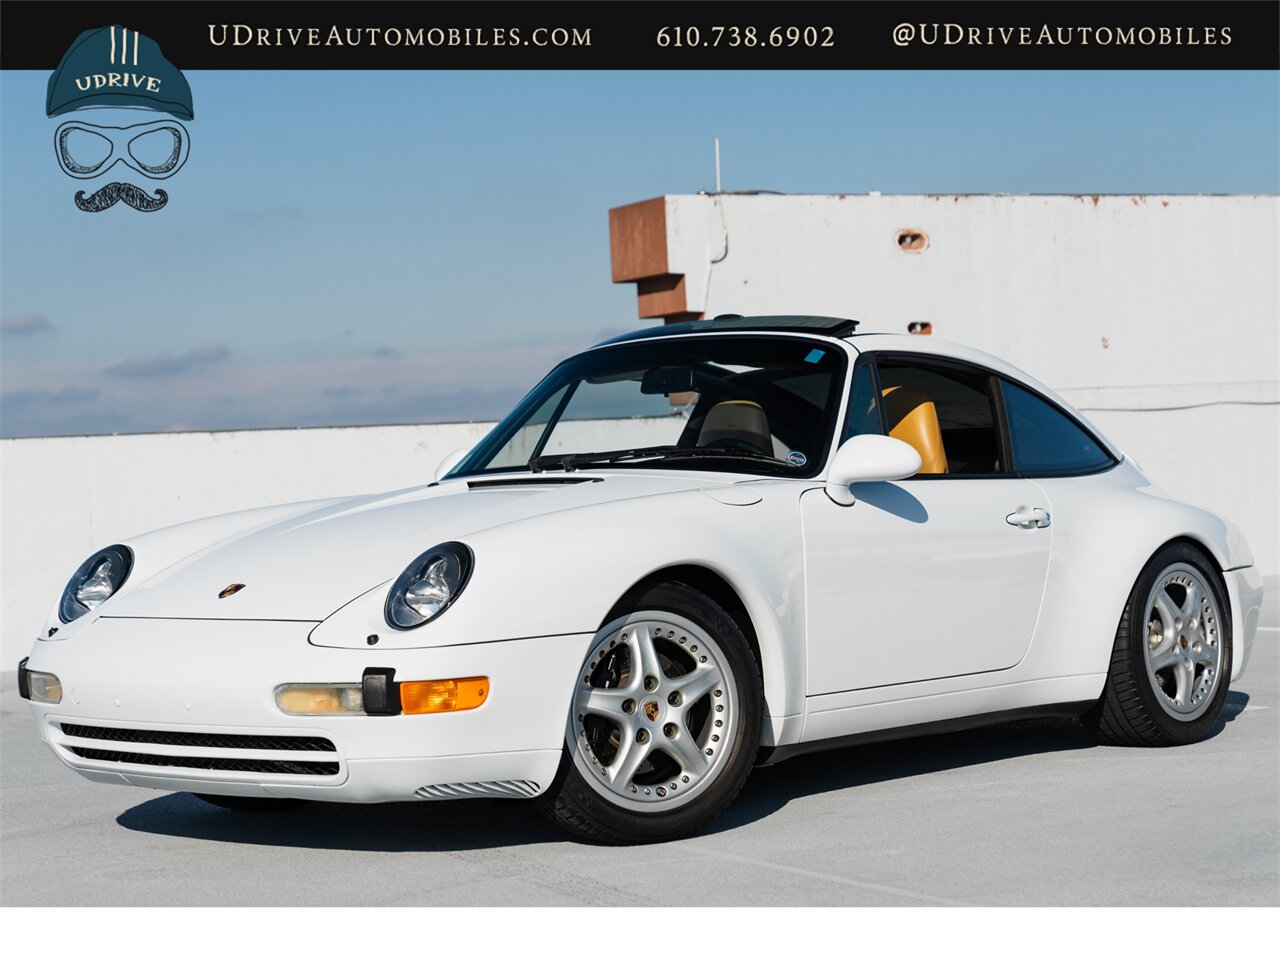 1998 Porsche 911 Carrera 993 Targa  1 of 122 Produced 6 Speed $10k Recent Service Engine Reseal - Photo 1 - West Chester, PA 19382